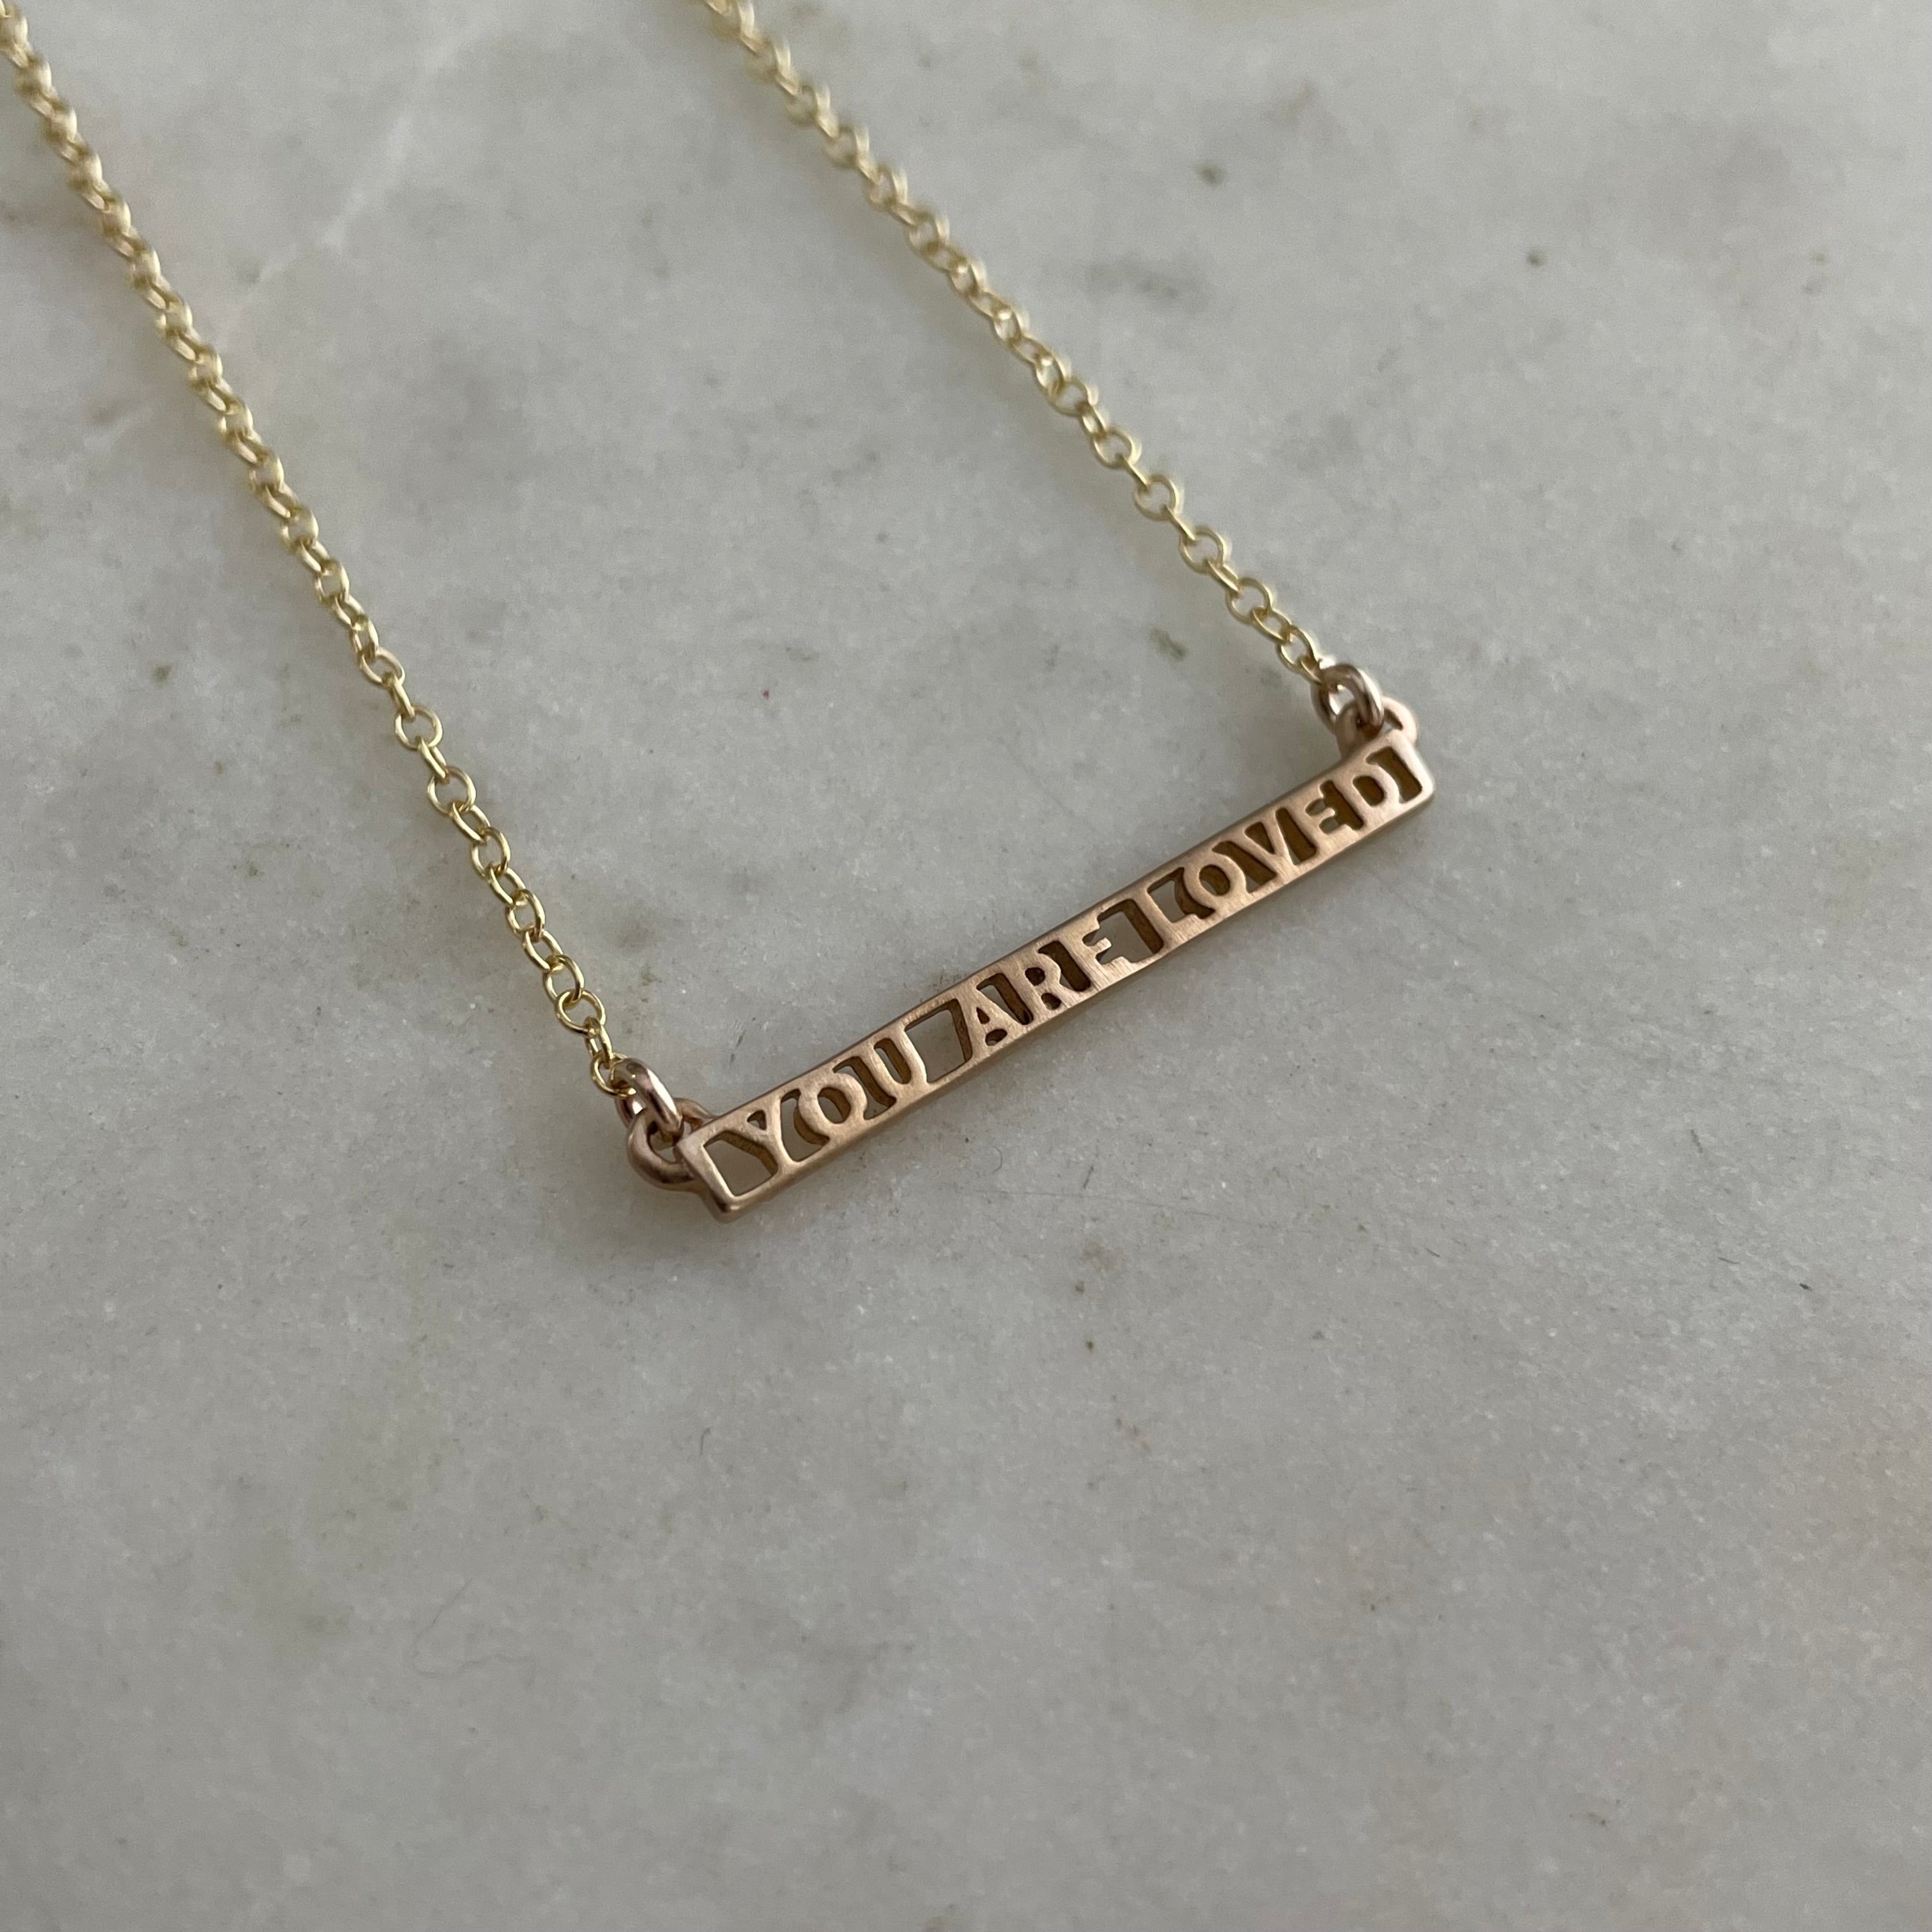 You are loved” Necklace – Shop where you are loved.